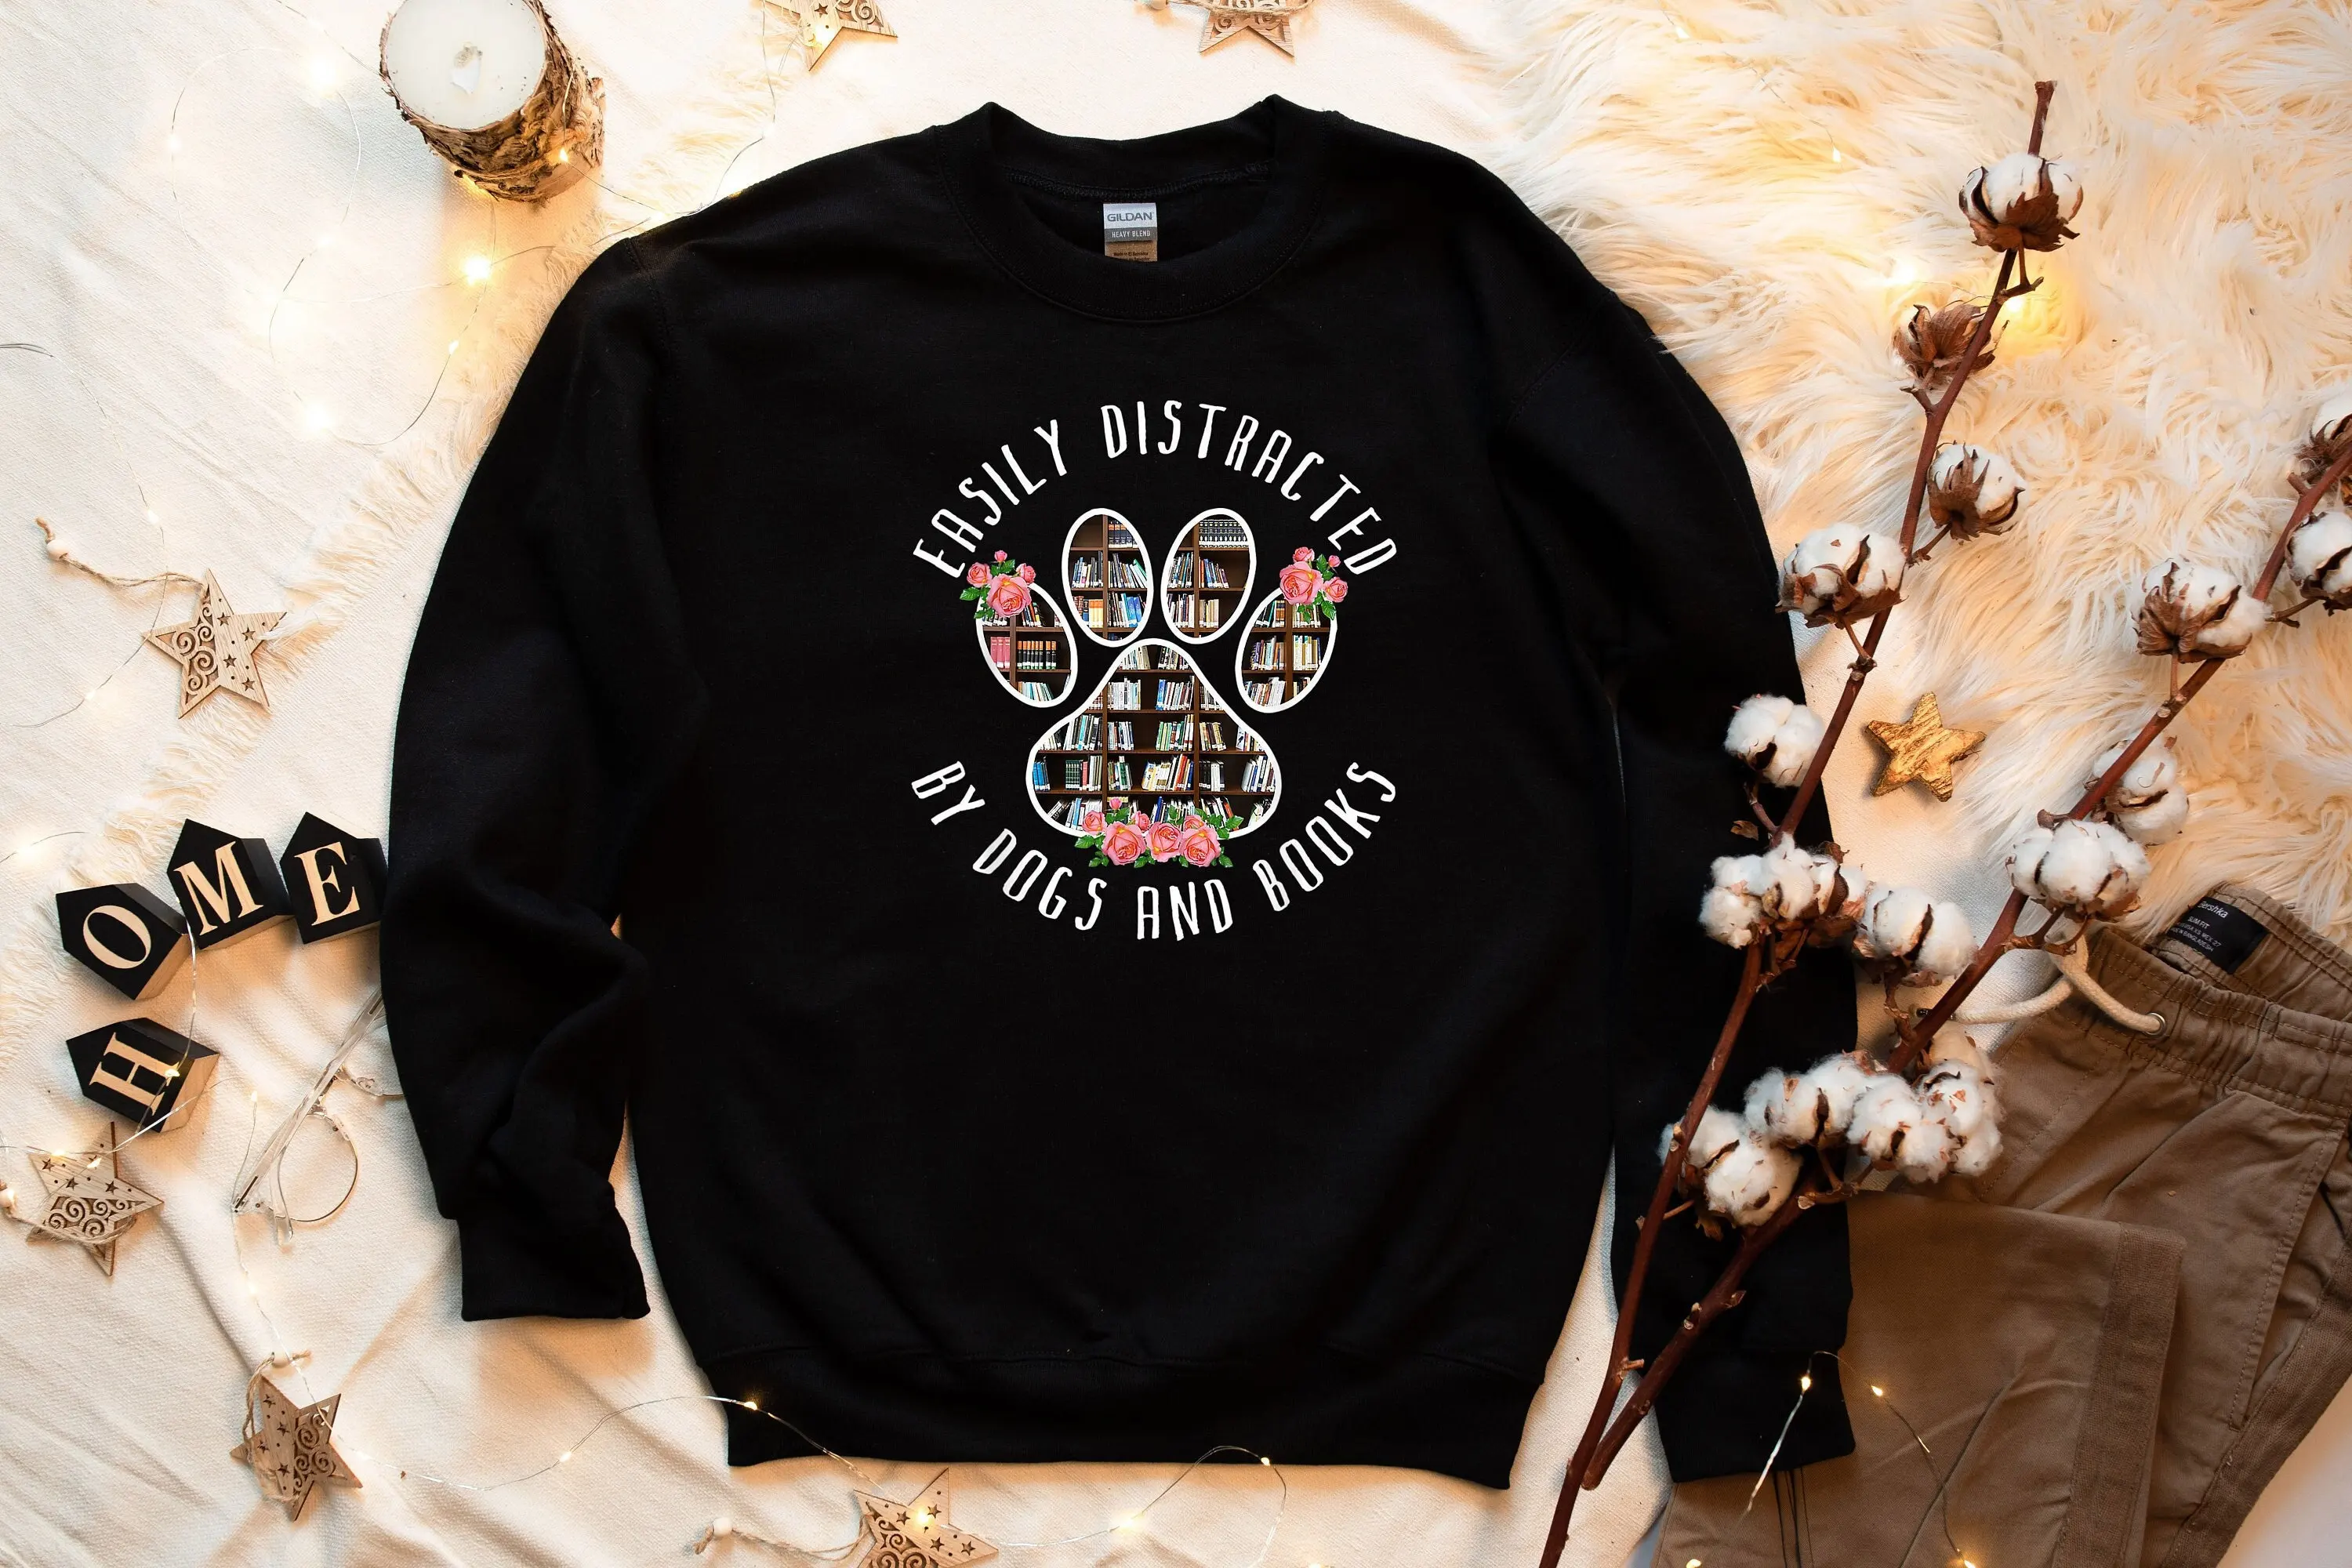 

Easily Distracted Dogs and Books Slogan Women Sweatshirt Cartoon Dog's Paw Flowers Bookshelf Print Reader Lover Female Clothes